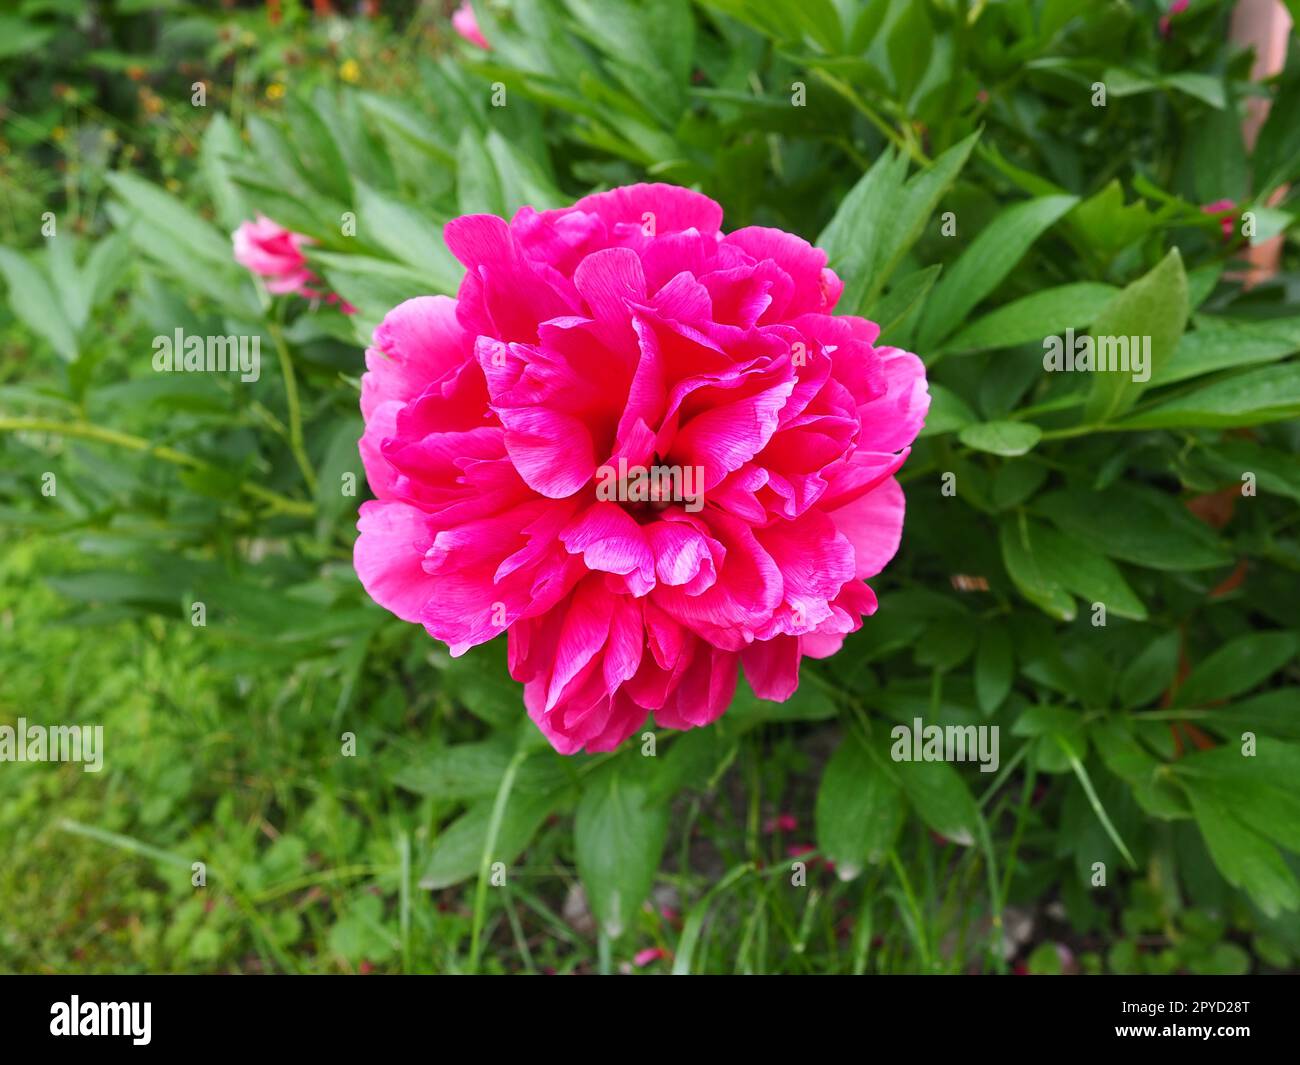 Red-pink peonies. Beautiful large peony flowers against a background of green foliage and grass. Floristics, floriculture and gardening as a hobby Stock Photo